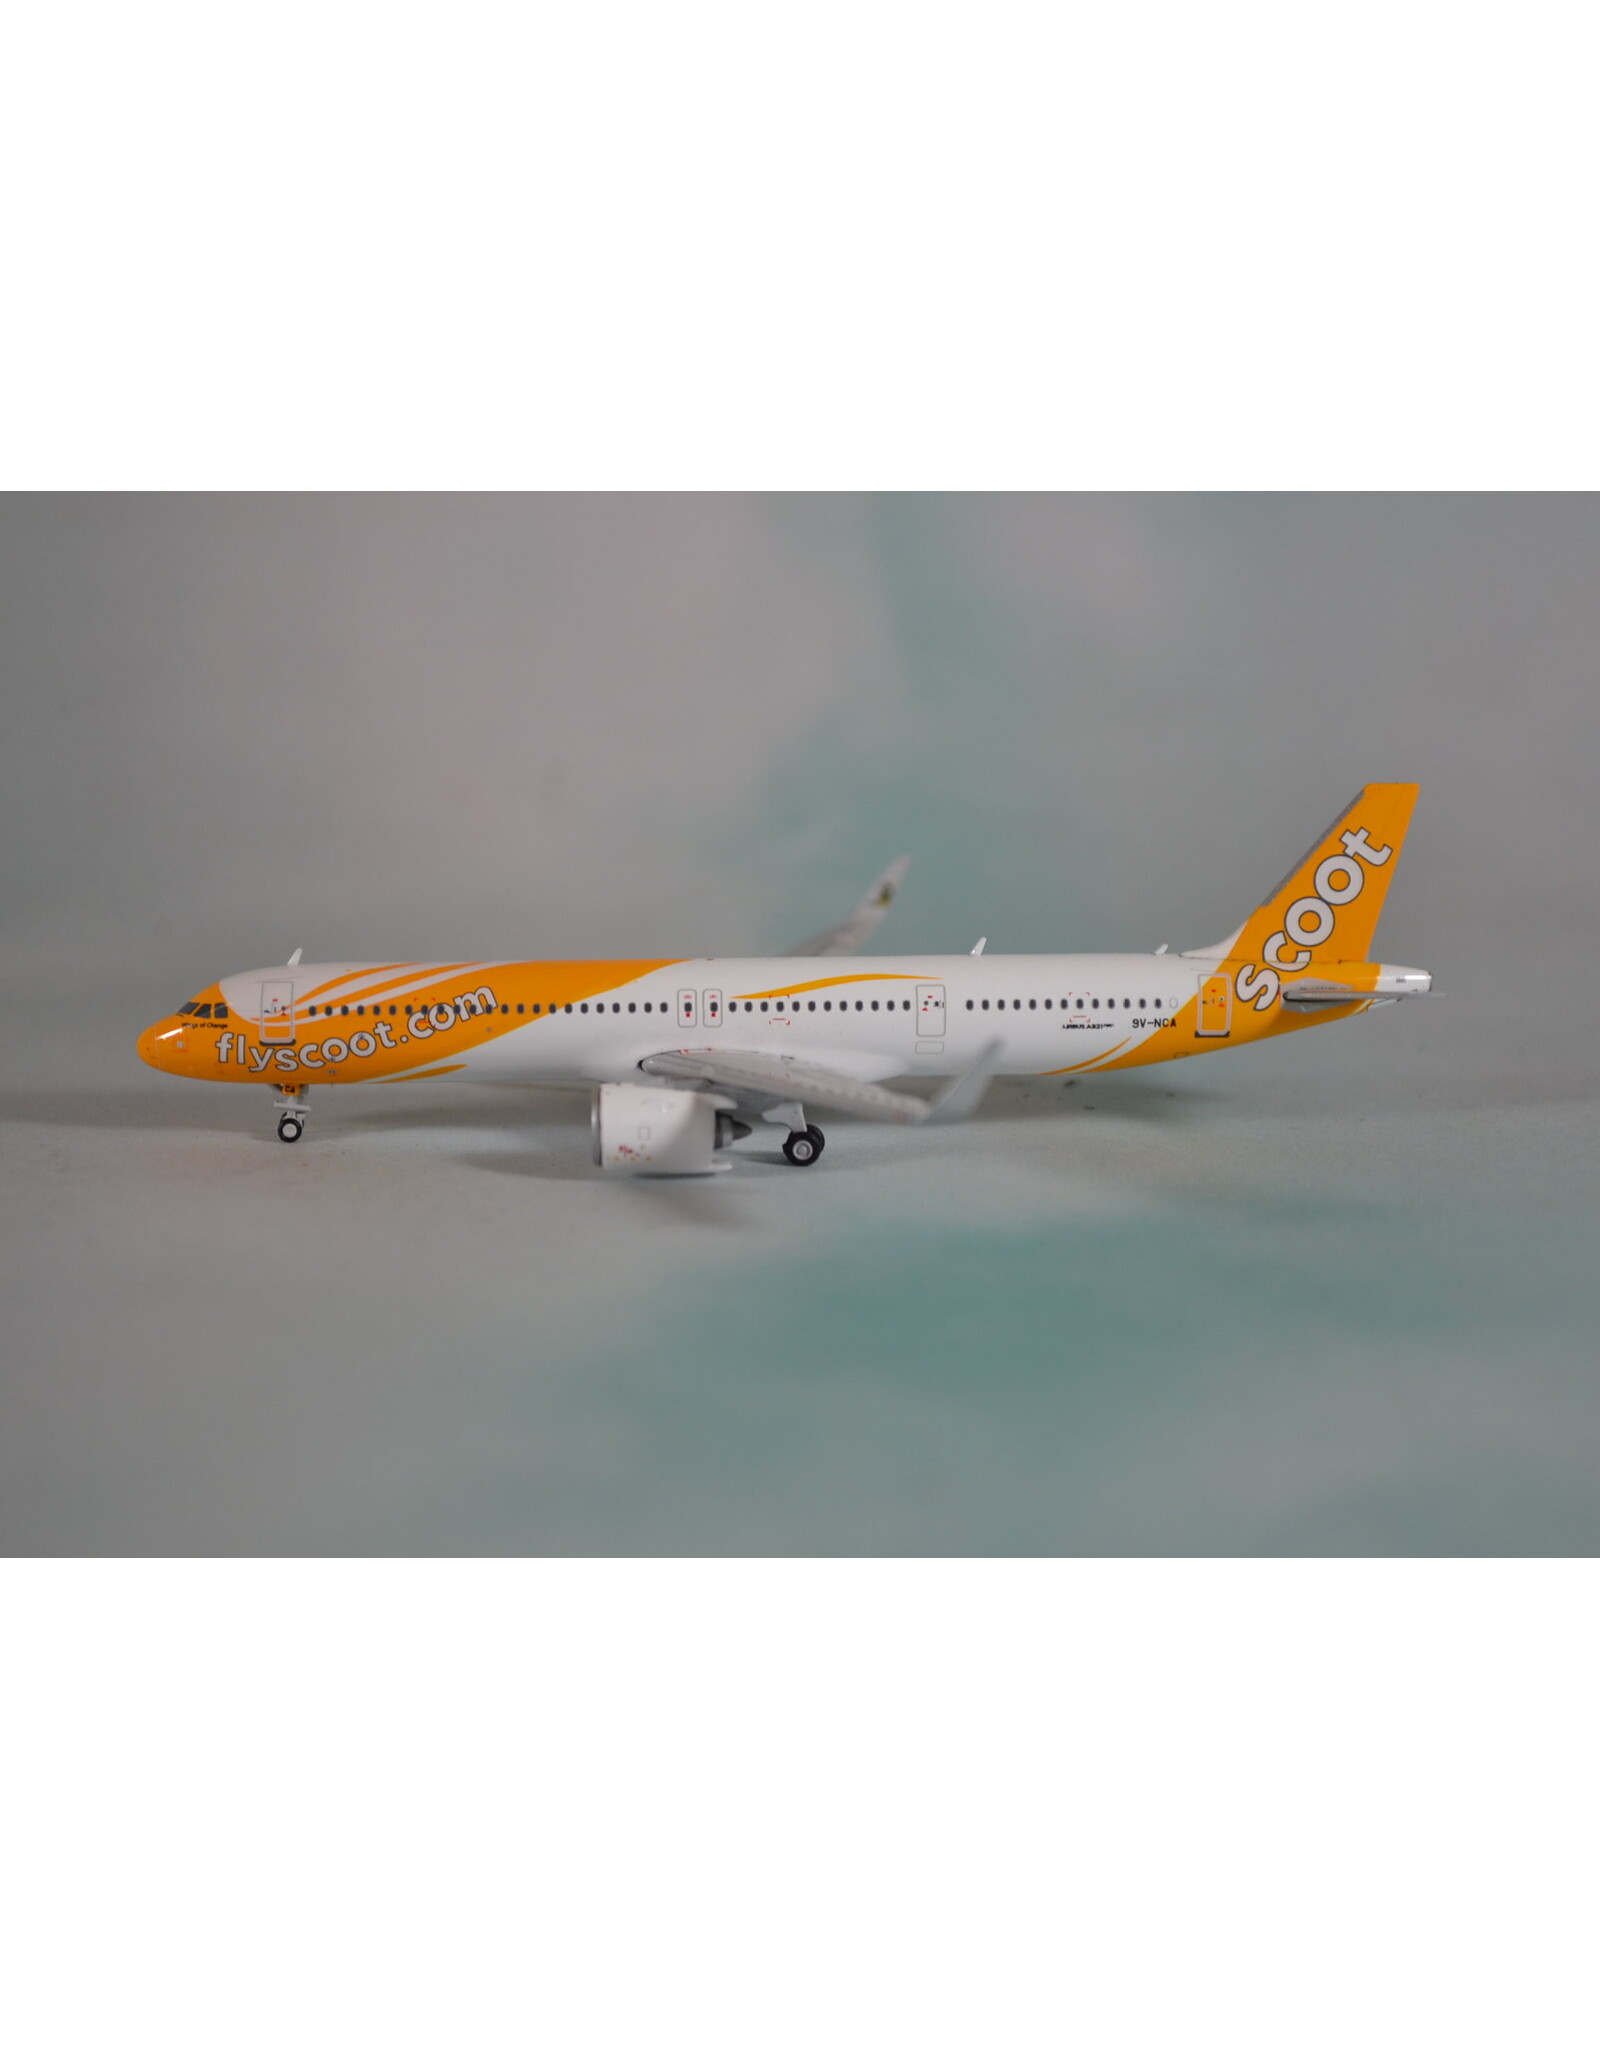 JC Wings JC4 Scoot A321neo 9V-NCA